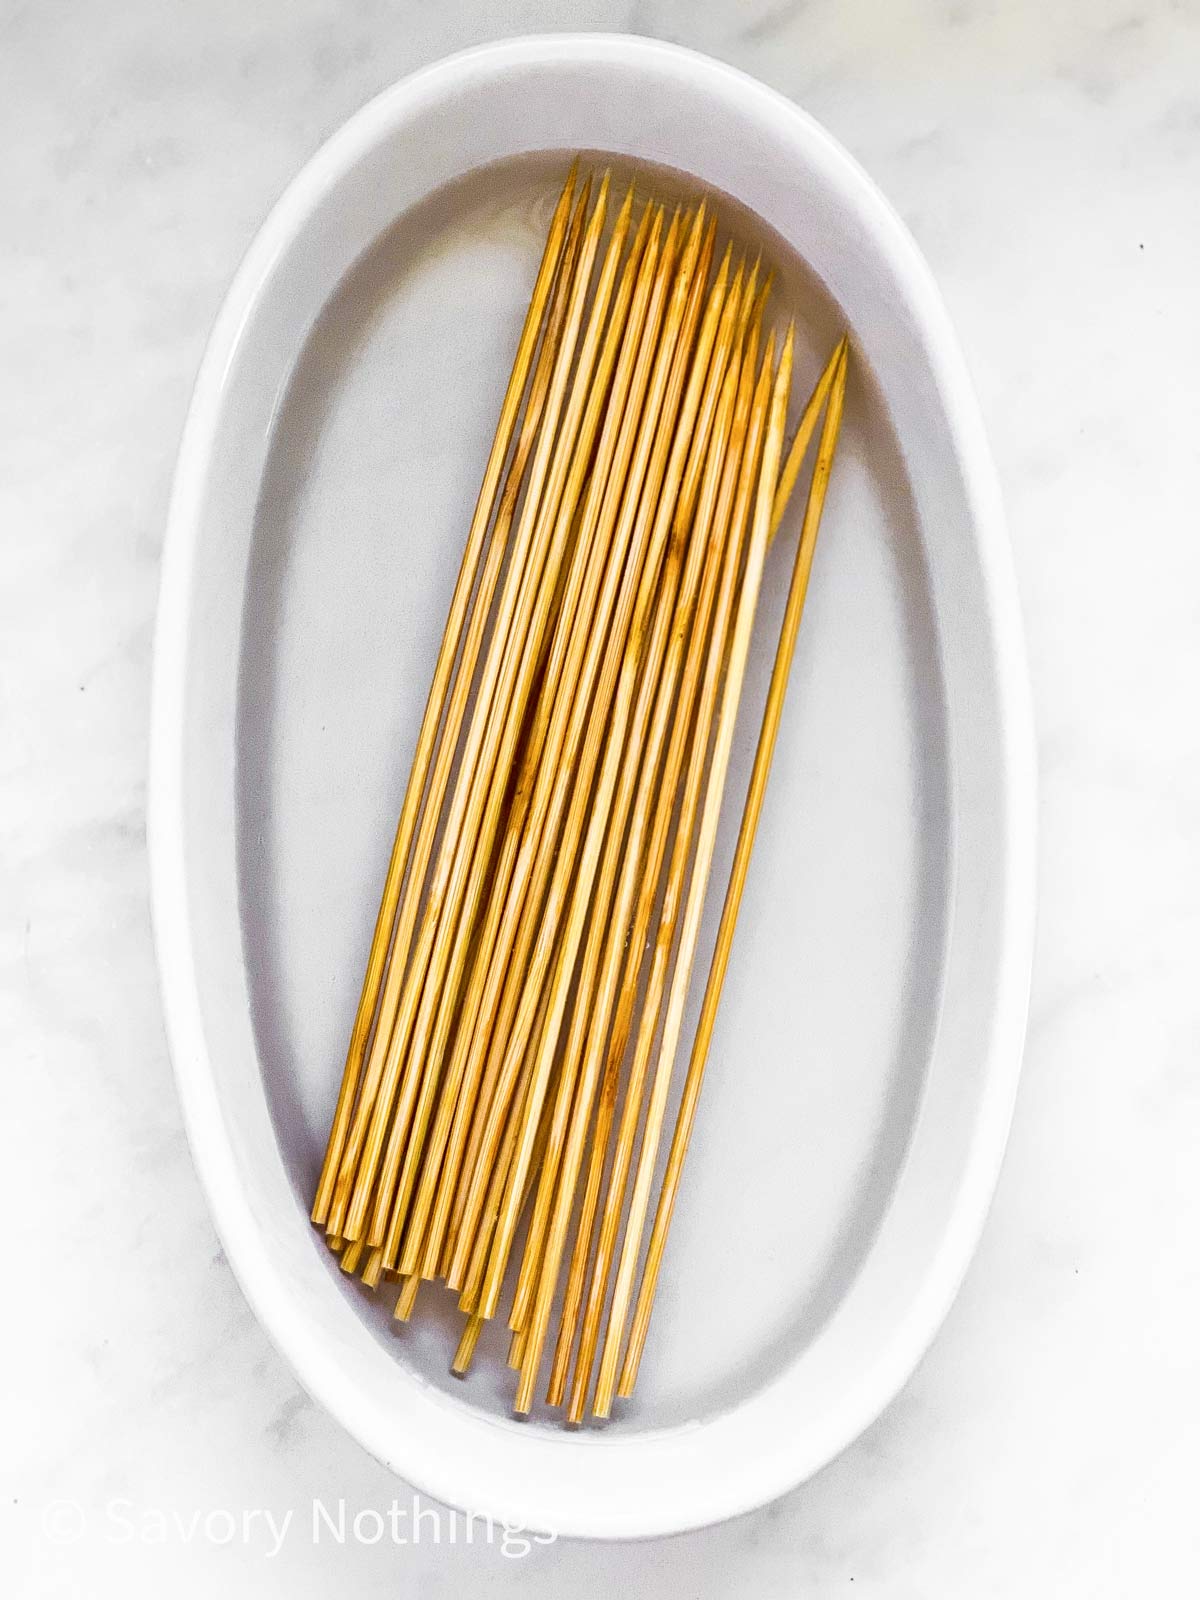 wooden skewers in an oval white dish in water